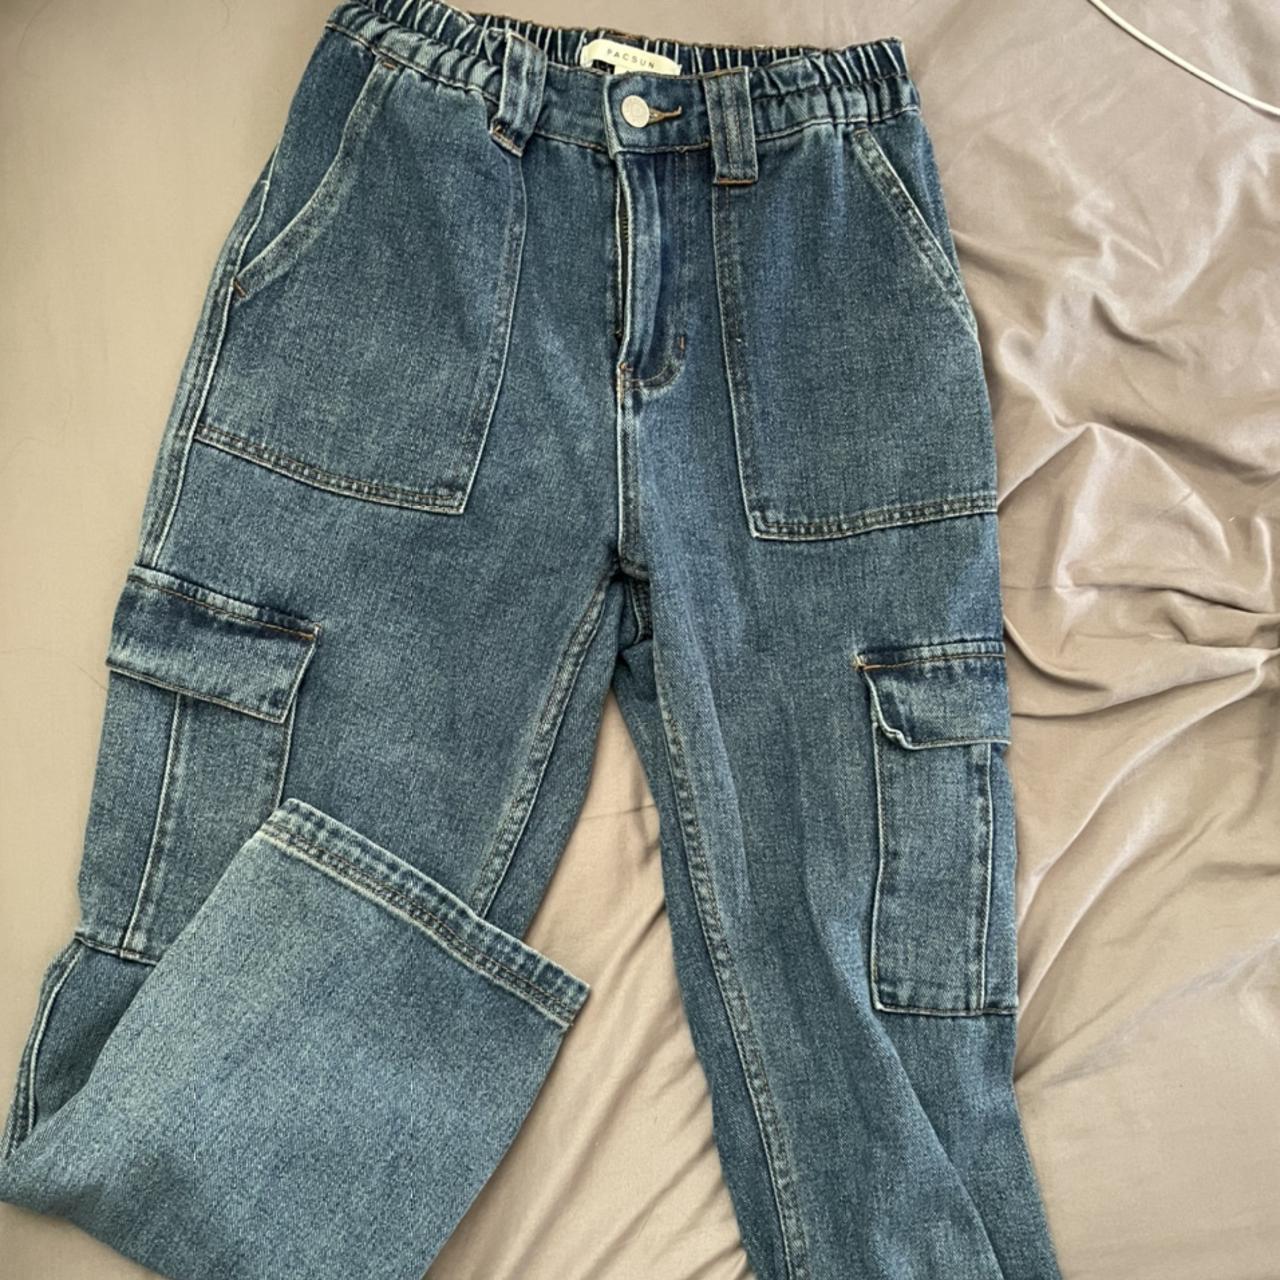 pacsun skate cargo jeans size small best for 26... - Depop